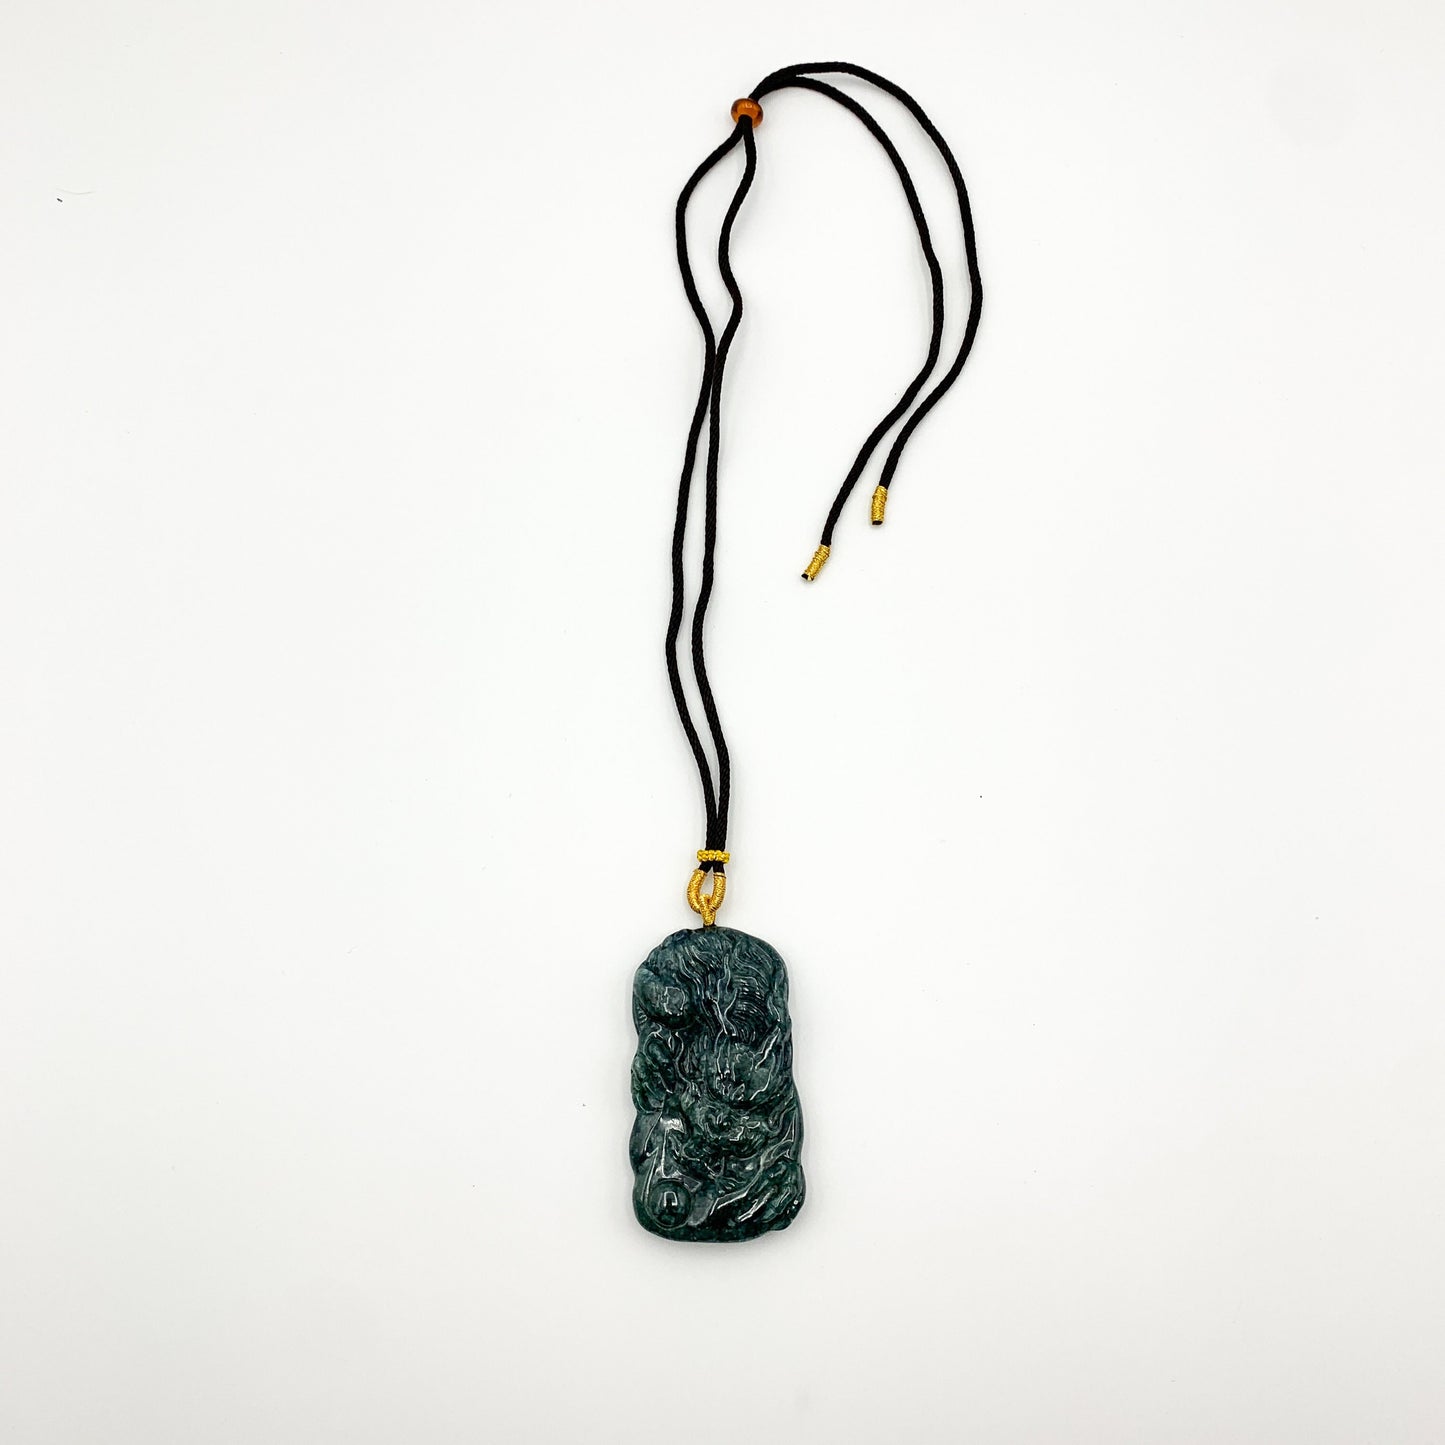 Green Jadeite Jade Dragon Chinese Zodiac Hand Carved Pendant Necklace, YJ-0321-0360443 - AriaDesignCollection